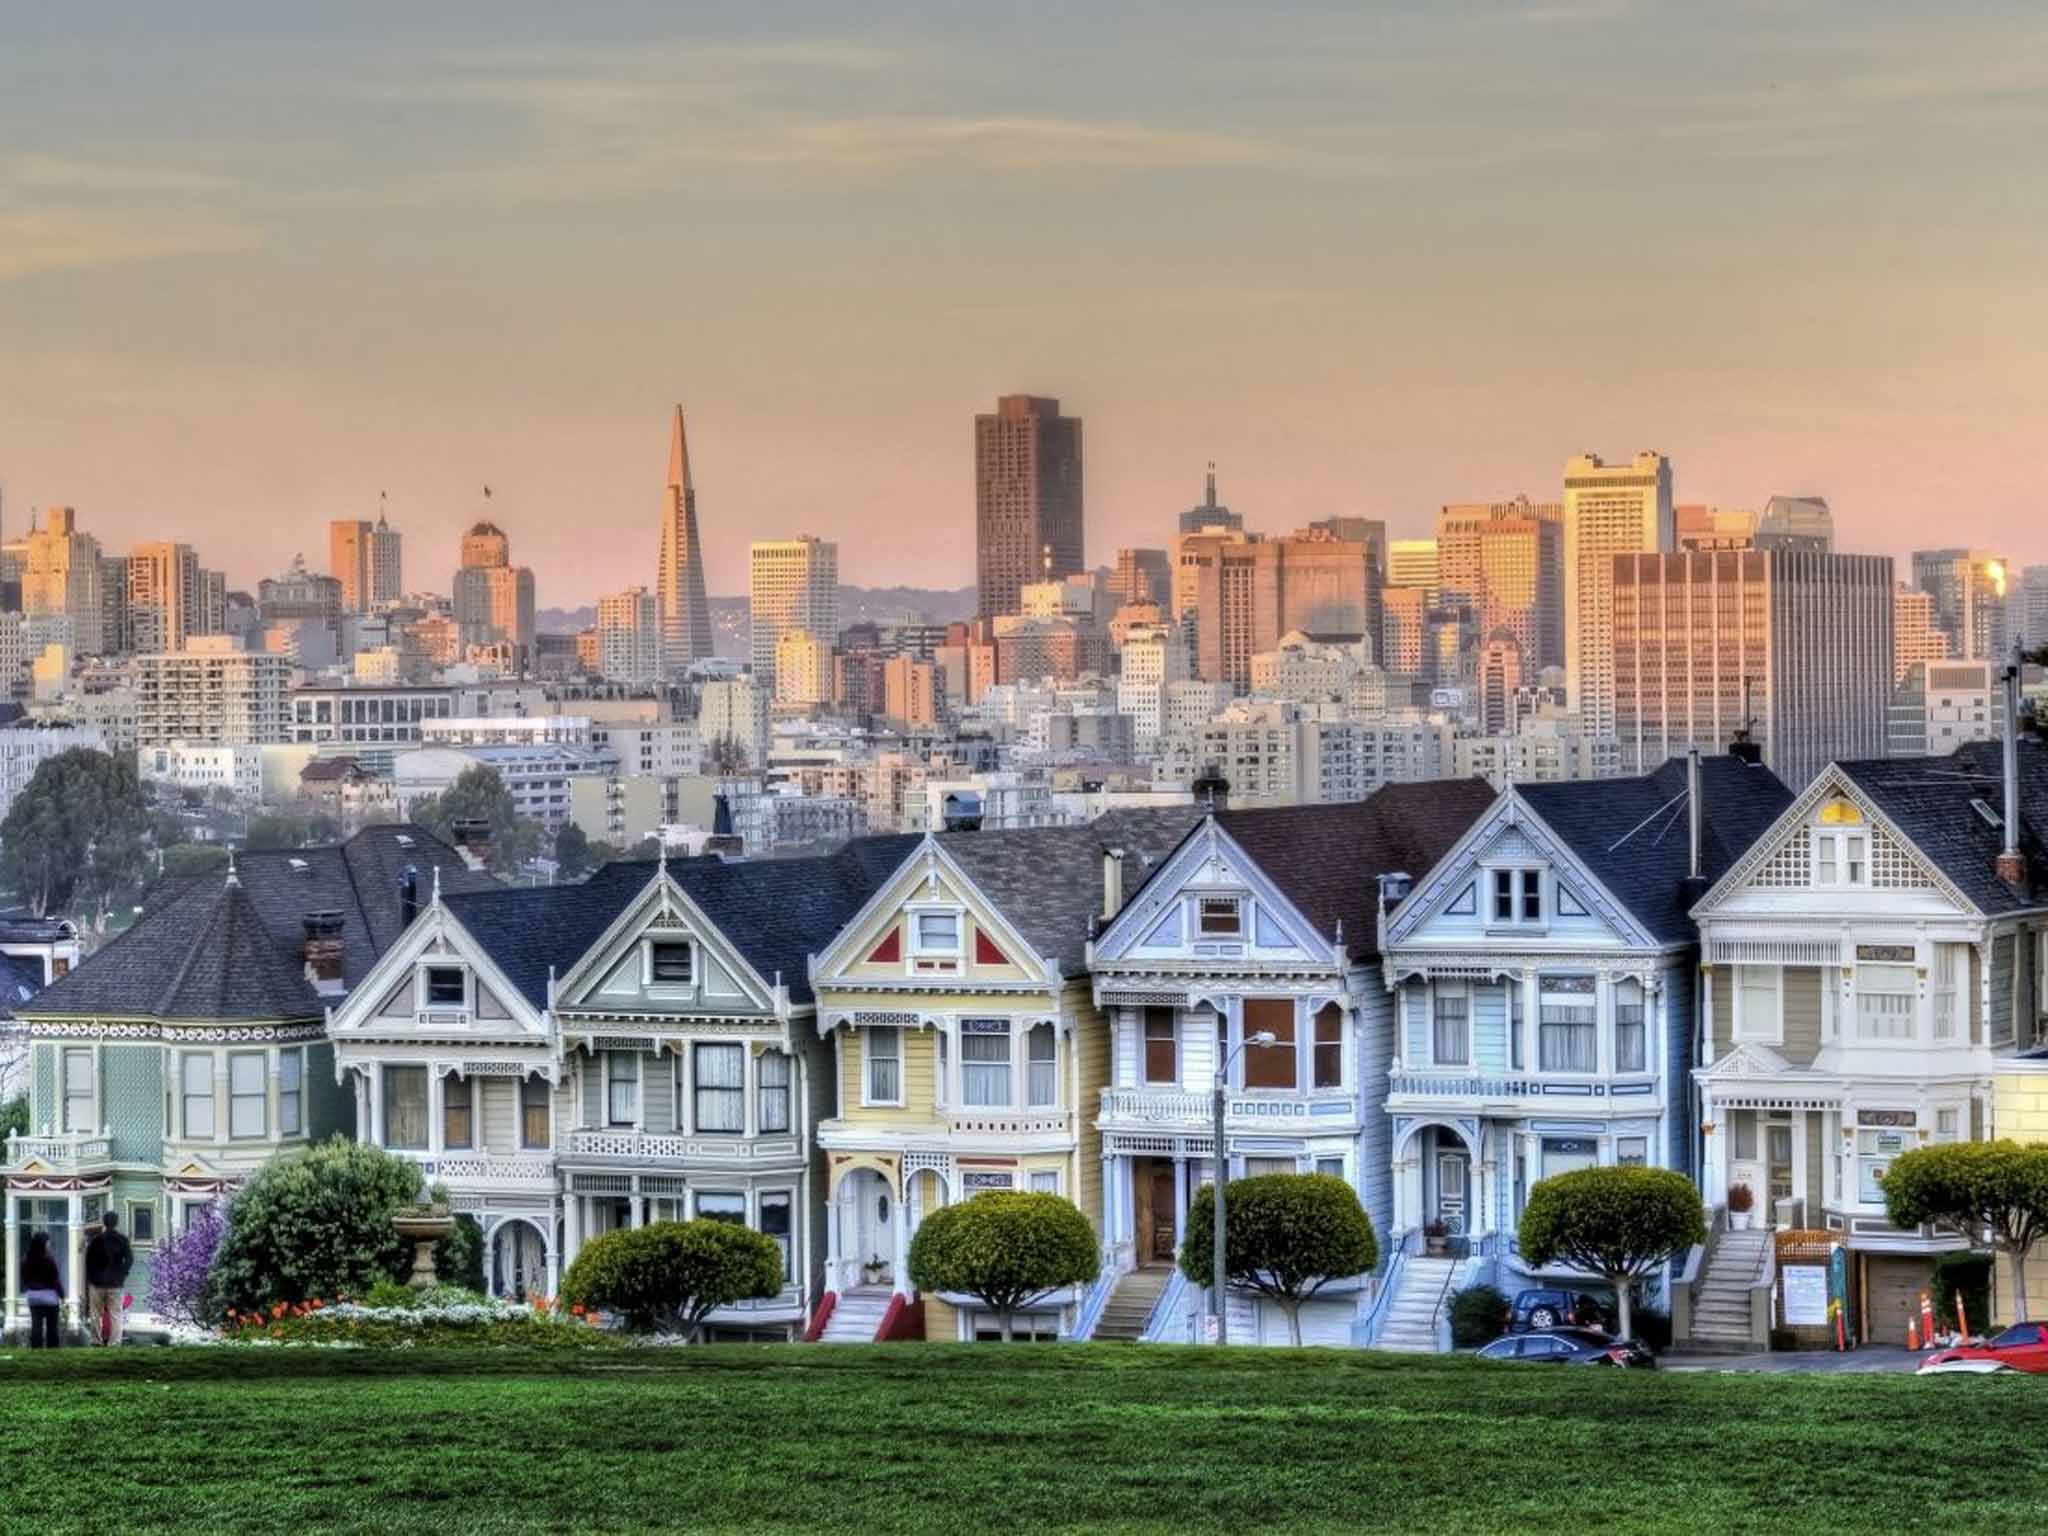 Can you guess which city is the most expensive?